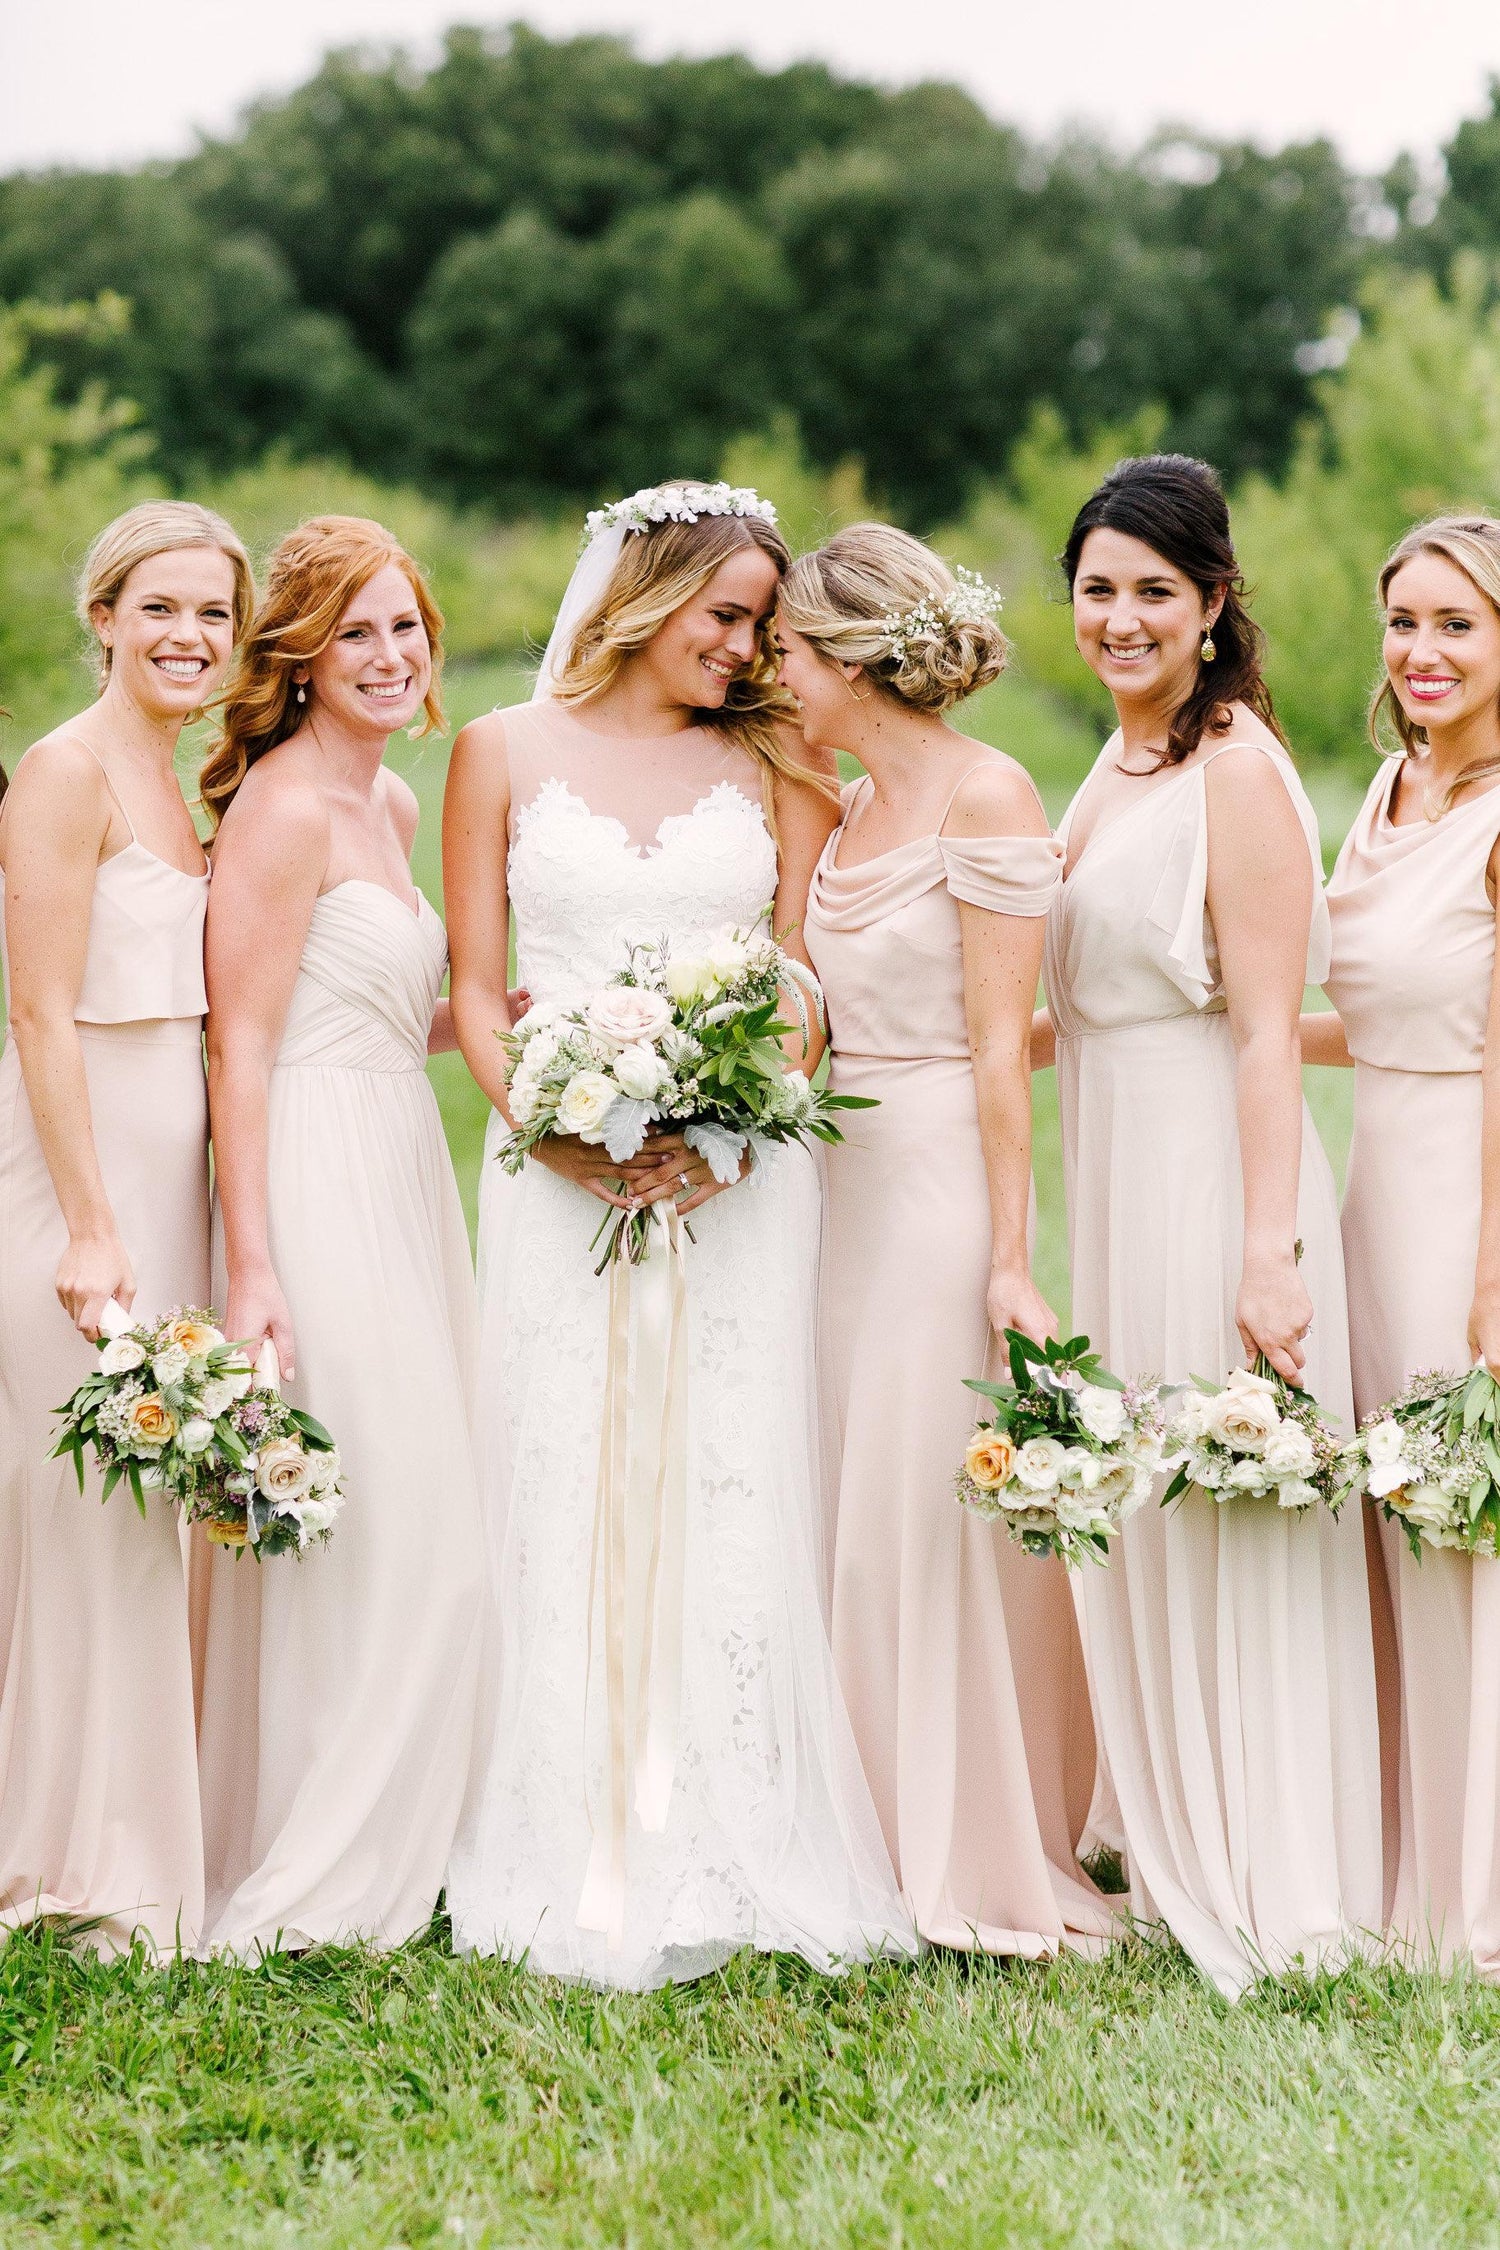 Elegant and Lush, the Backyard Wedding We All Dream About.